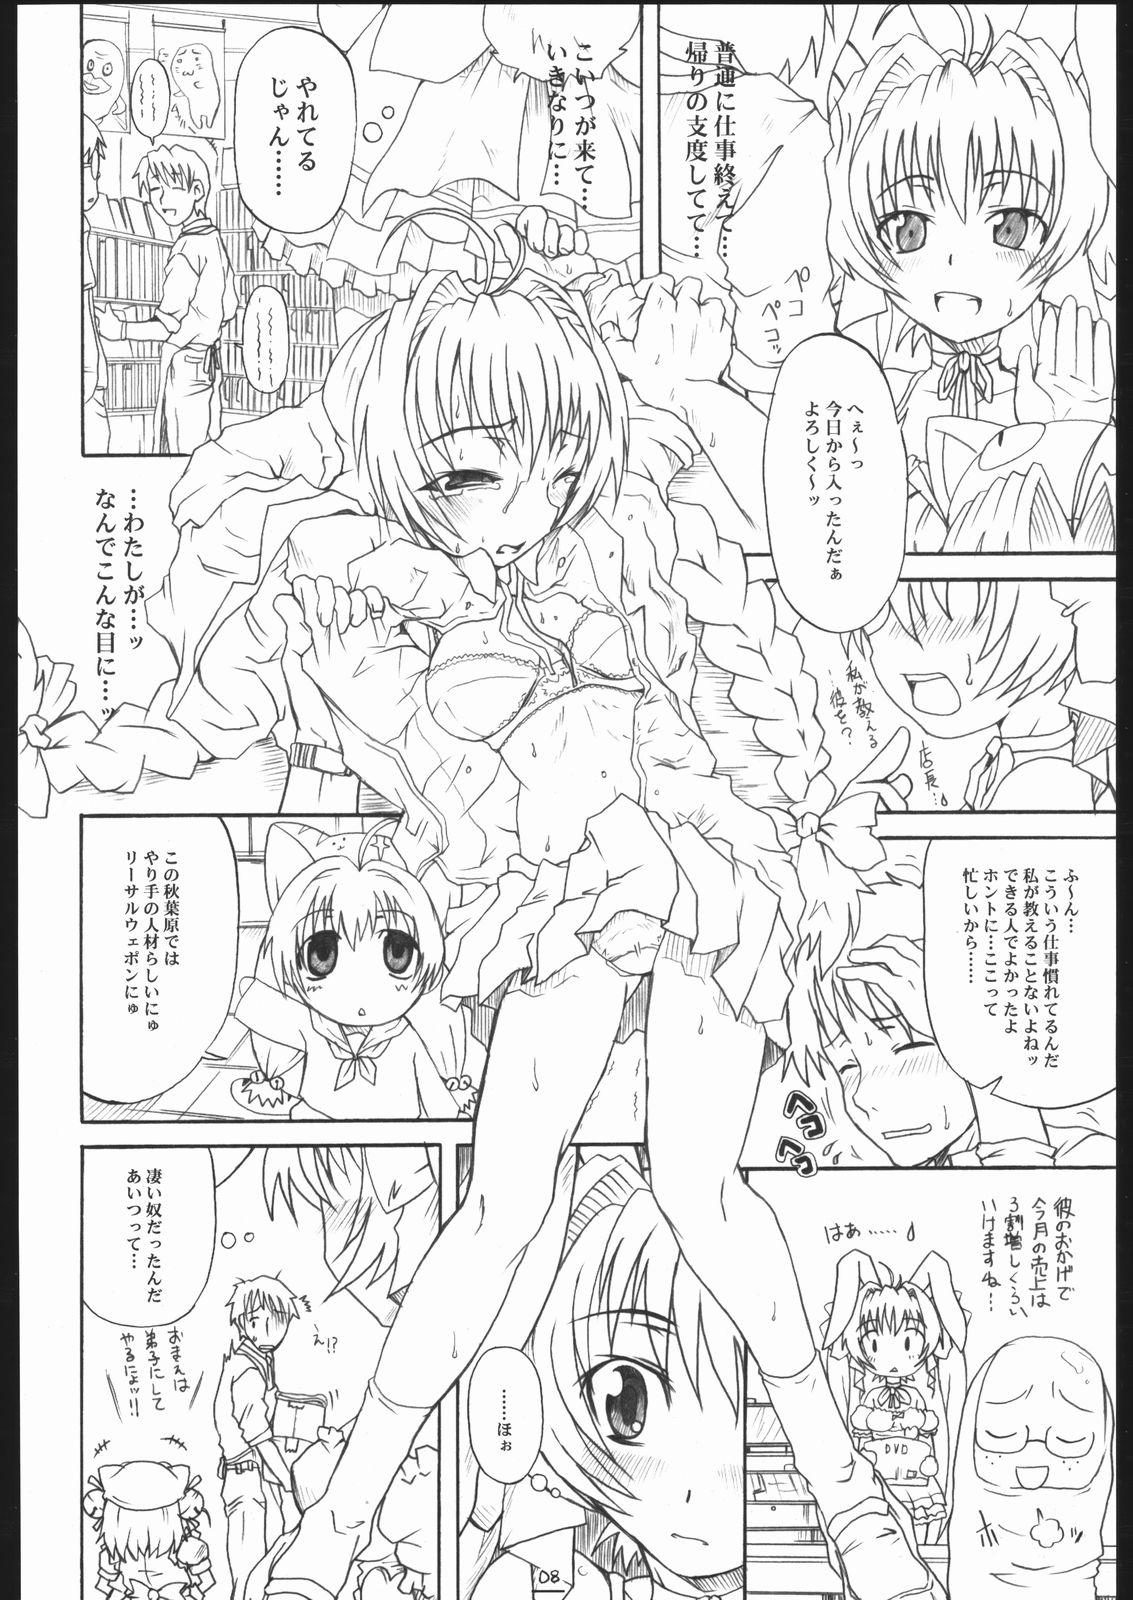 Pigtails Max Out It! 2 - Di gi charat Hermosa - Page 7